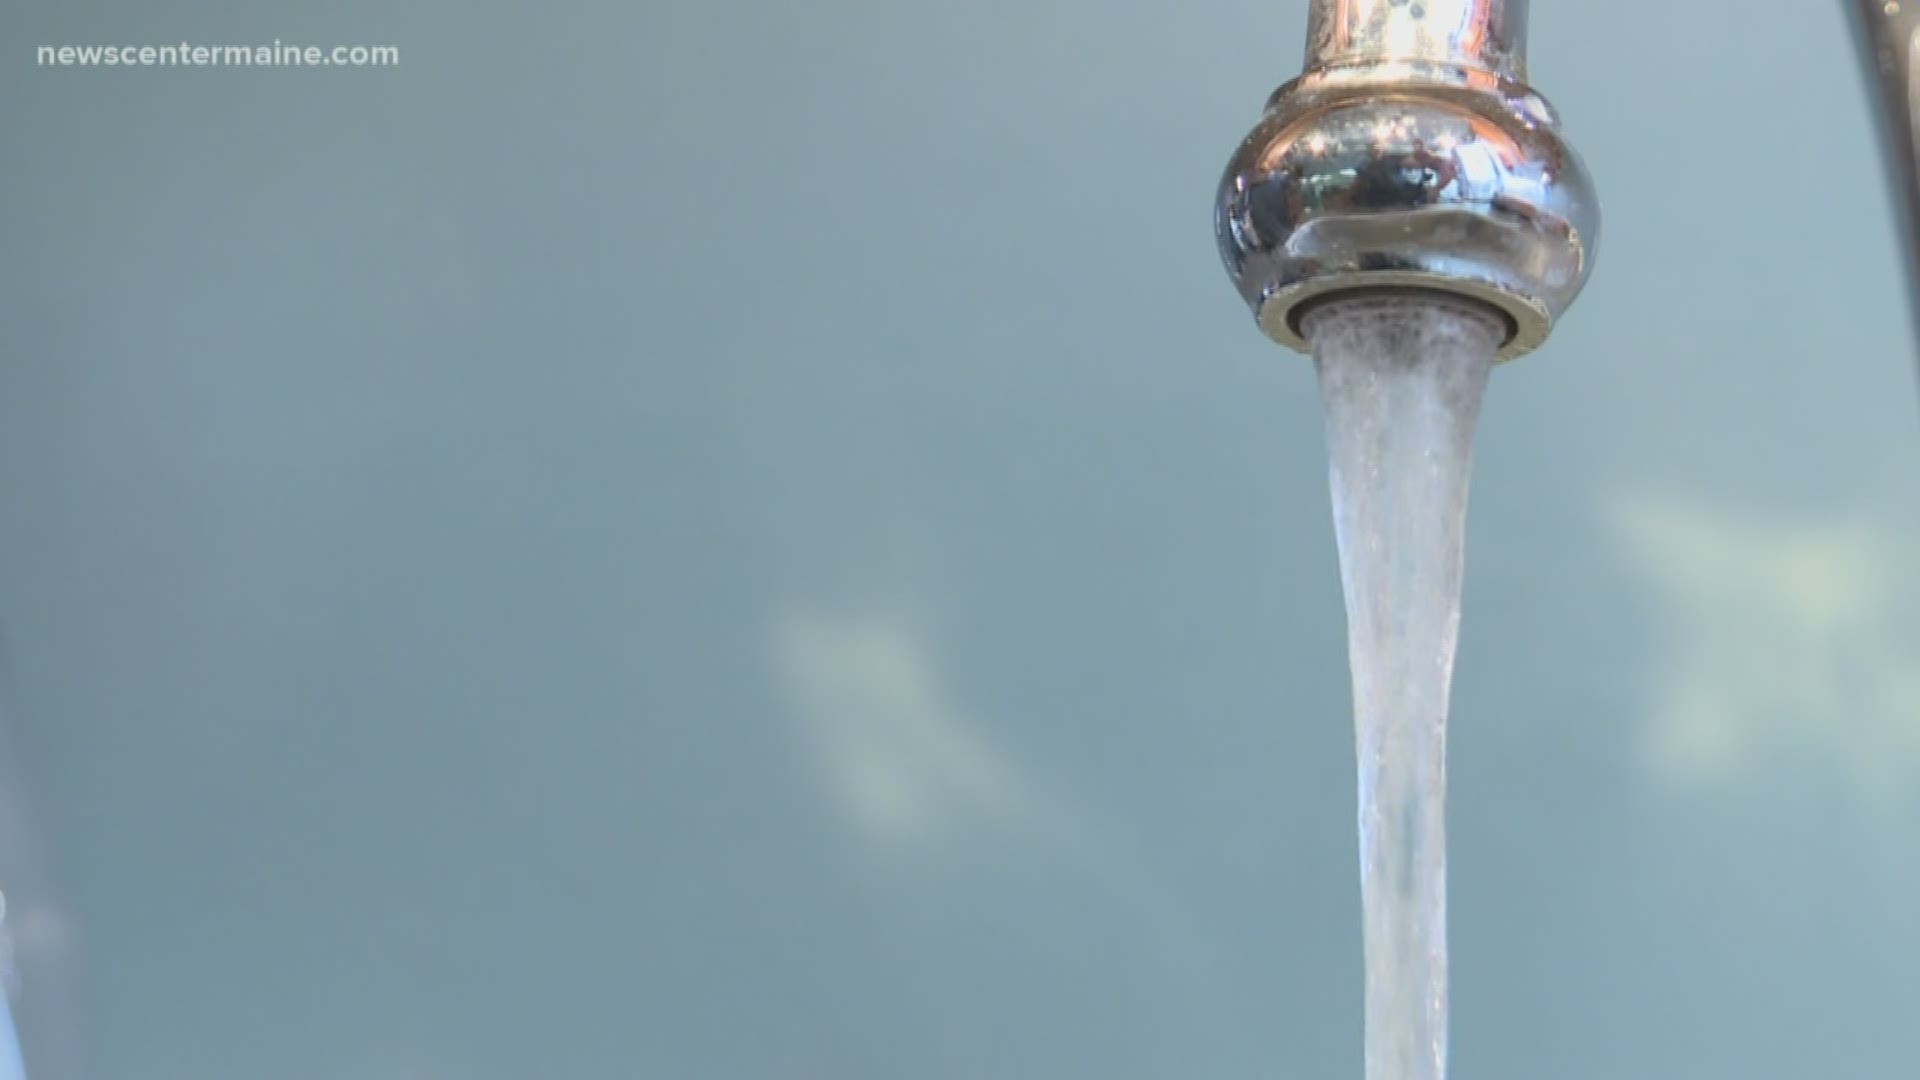 Federal study to be conducted on PFAS